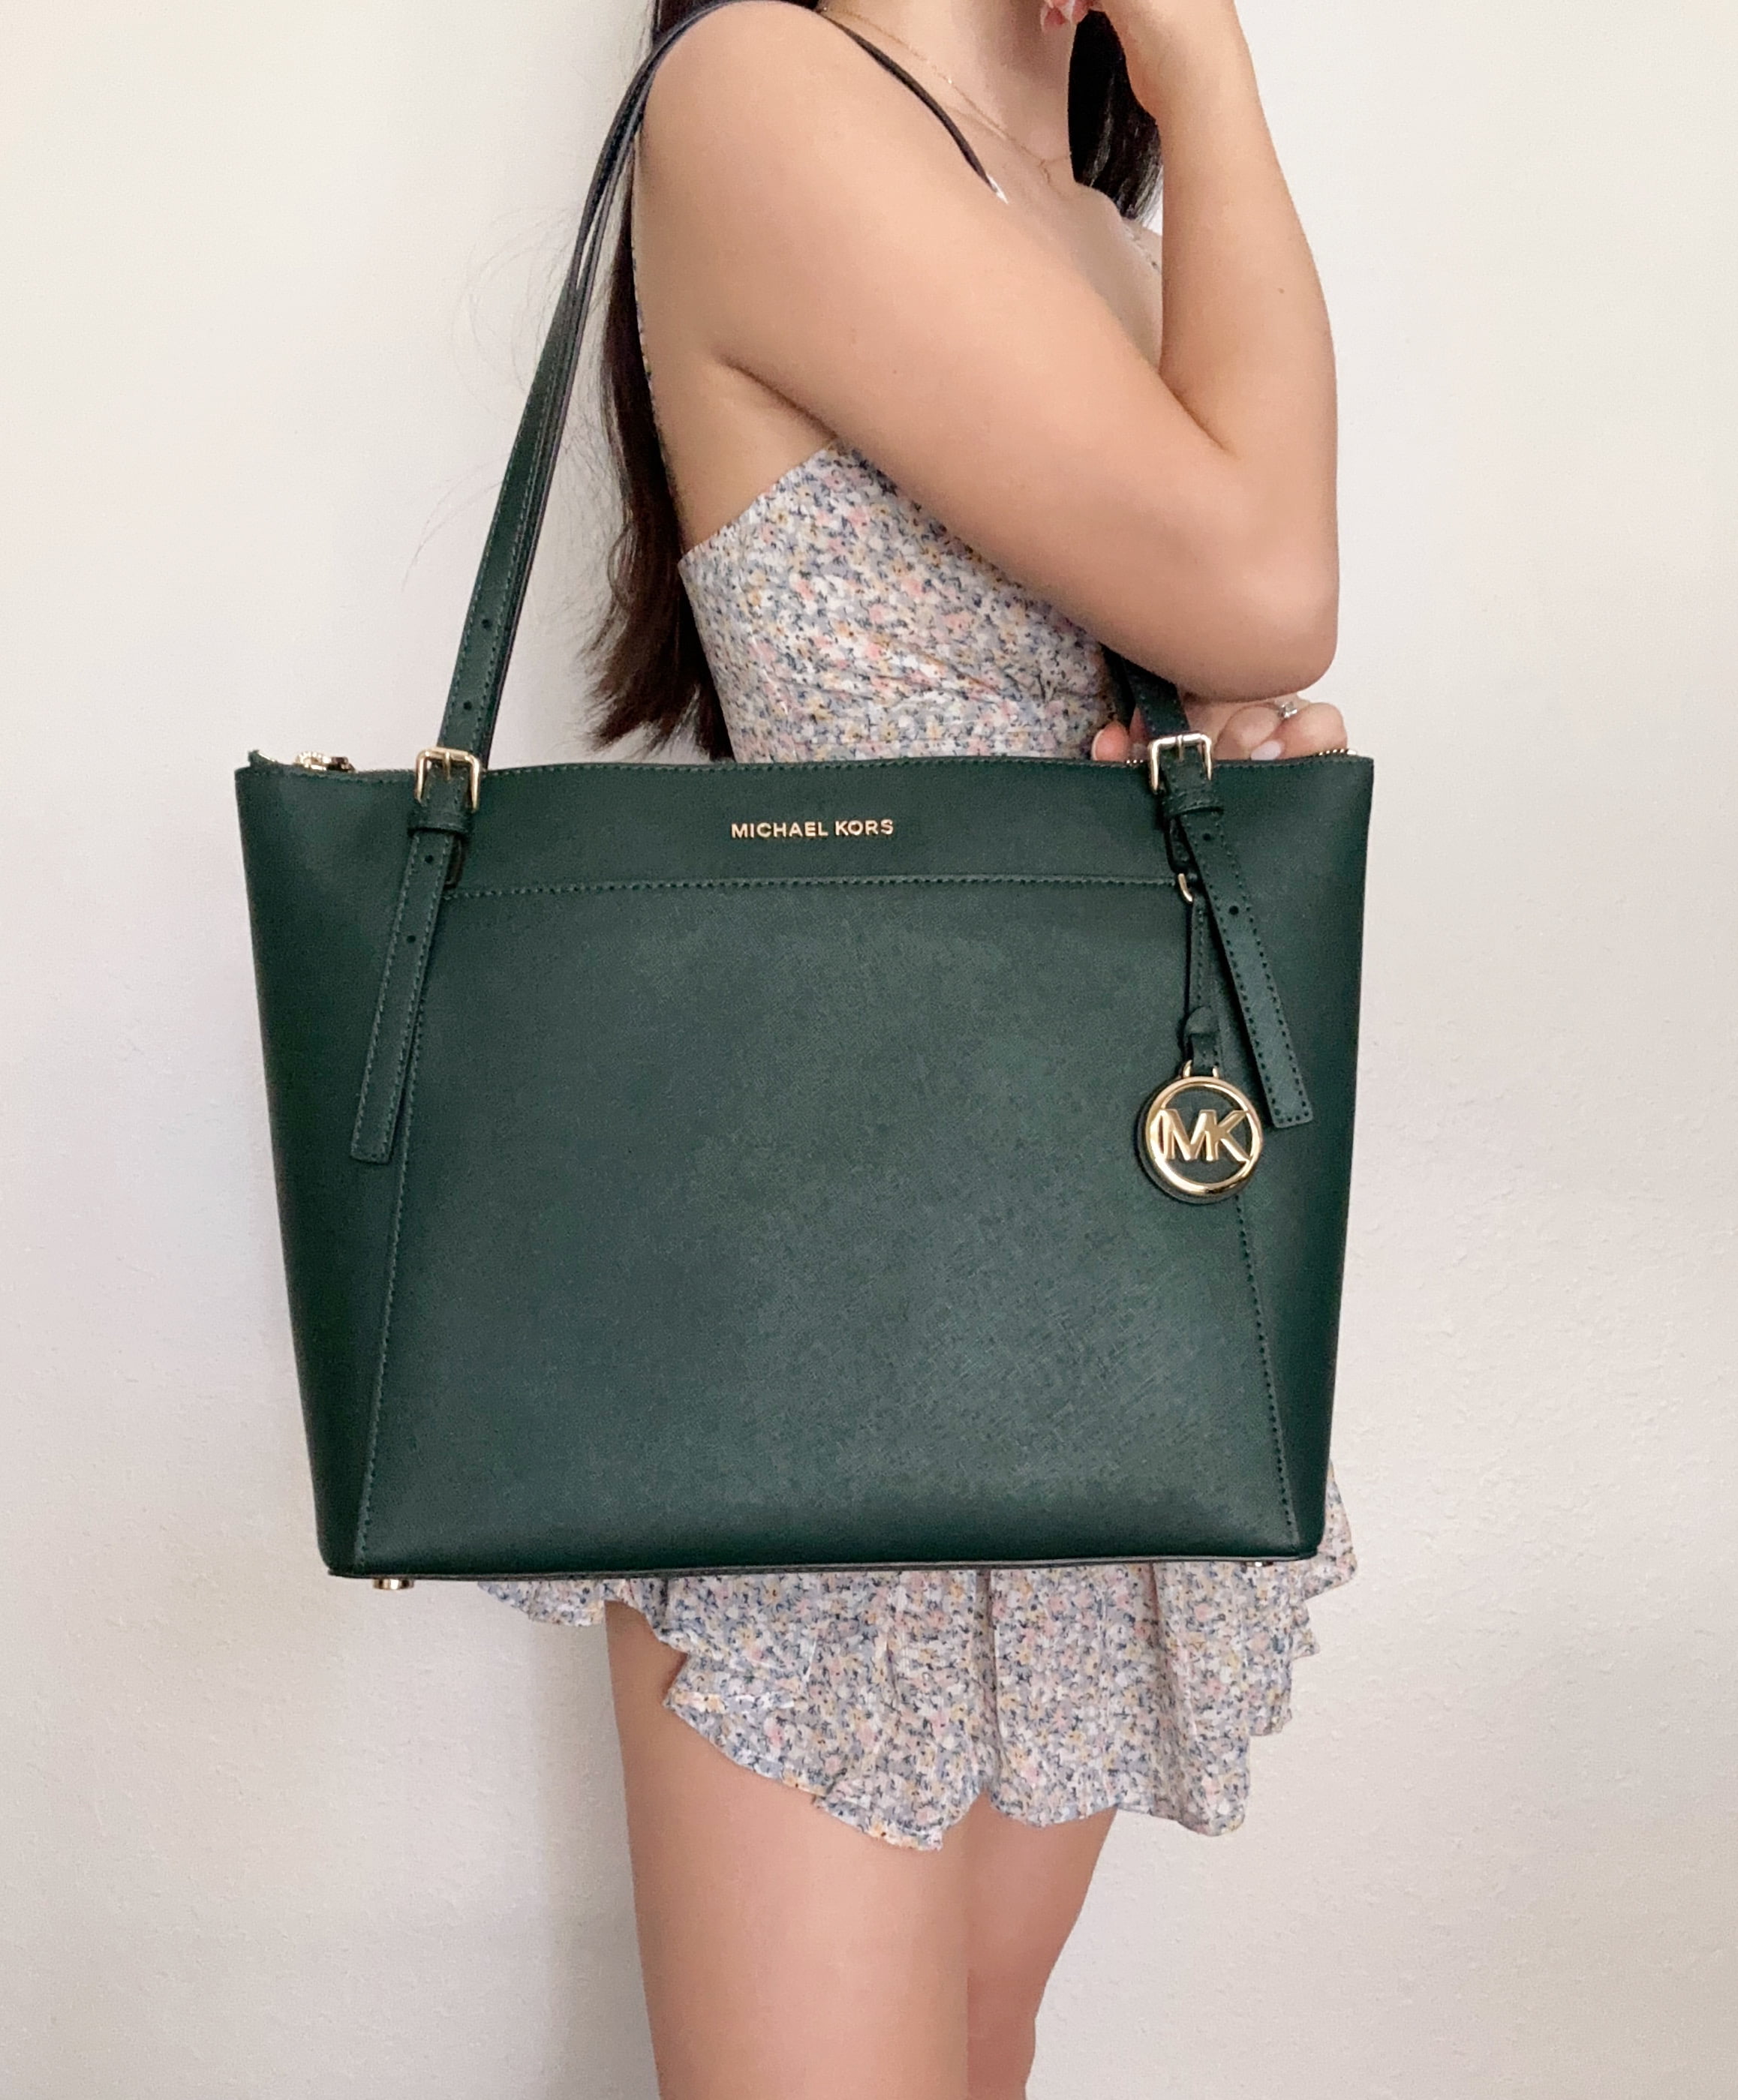 Michael Kors Voyager Large East West Tote Bag Saffiano Leather Racing Green